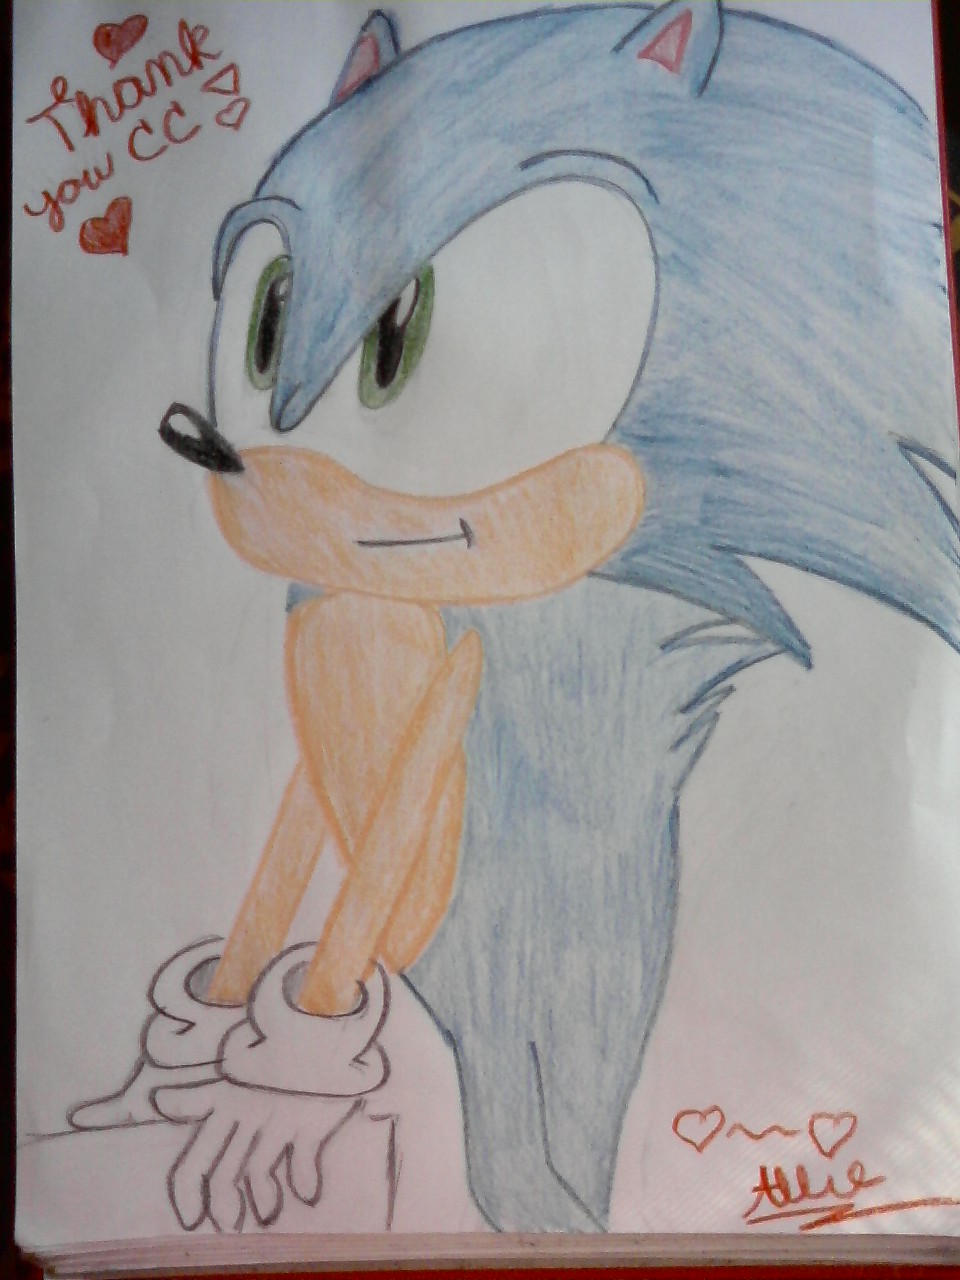 Sonic the Hedgehog - Thank you NPG by idoodle